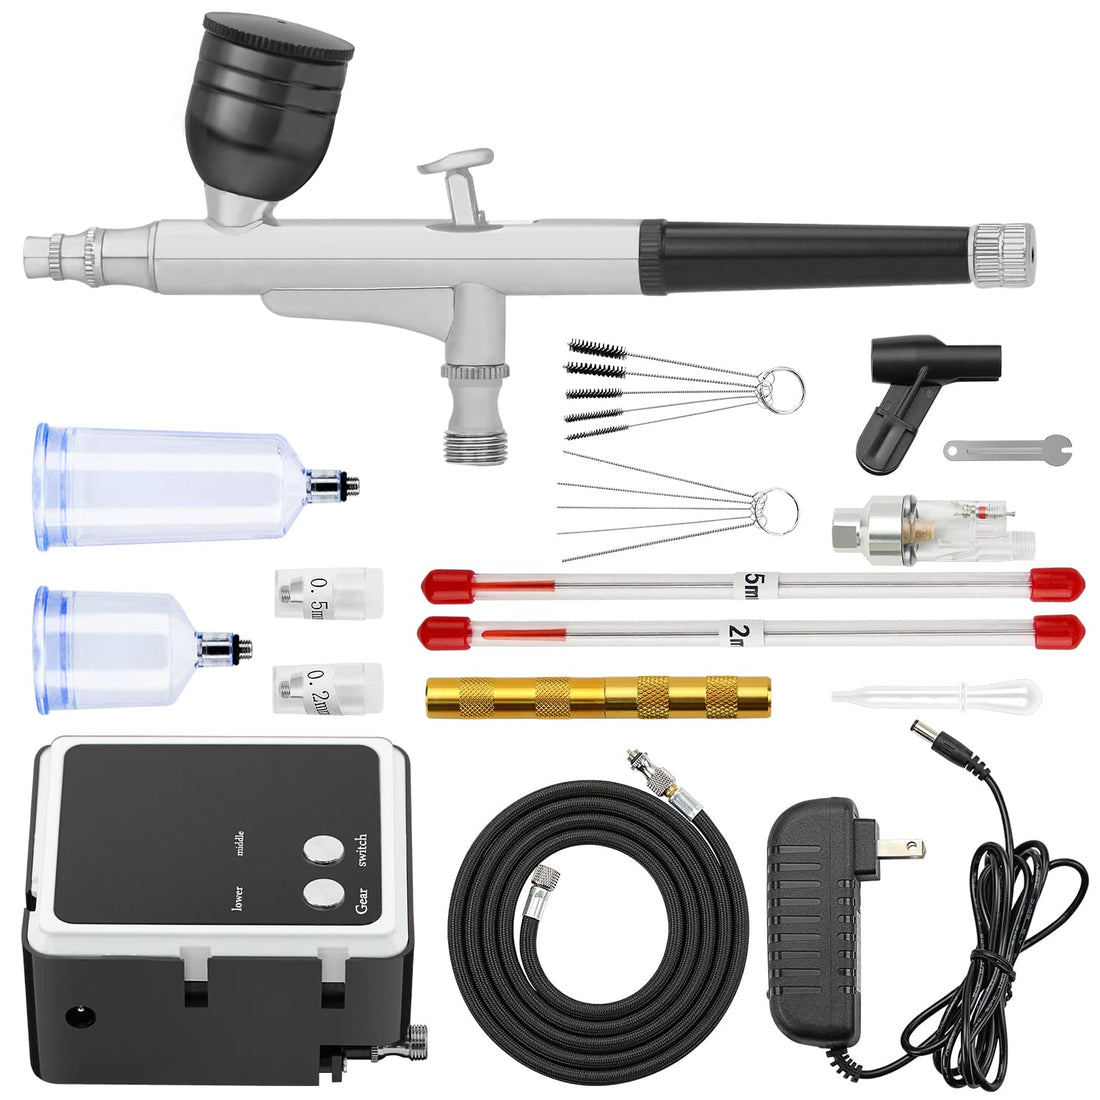 YXGOOD Airbrush Kit with Compressor, Rechargeable Portable Handheld Airbrush with 0.2/0.3/0.5 mm Nozzles for Painting, Nail Art, Mode, Makeup, Cake, Barber